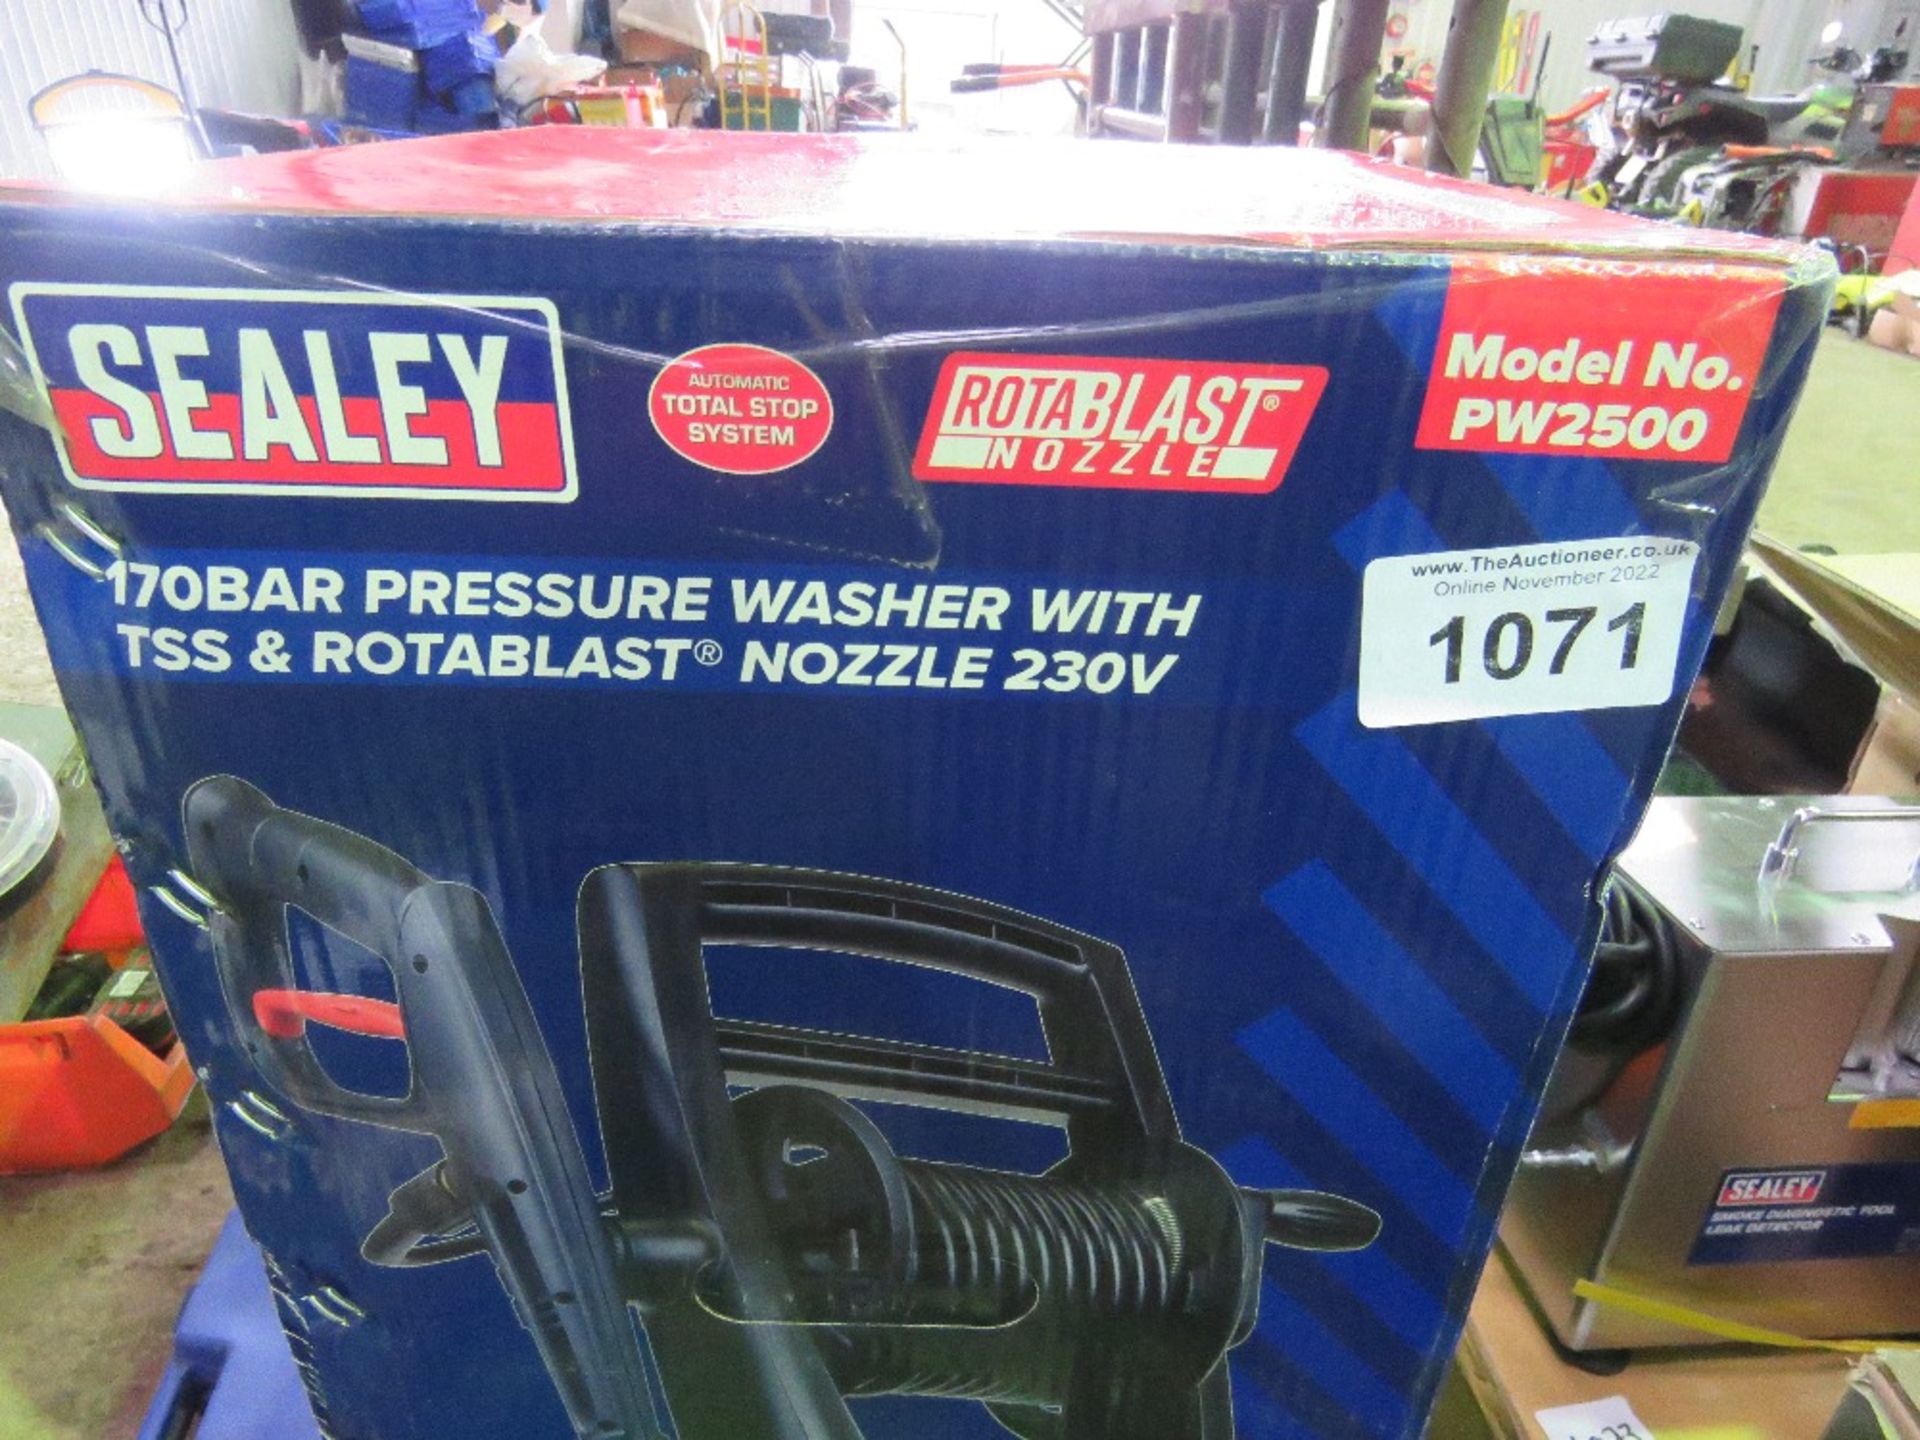 SEALEY 170BAR POWER WASHER SET, 230VOLT POWERED. BOXED, UNUSED, DIRECT FROM LOCAL COMPANY BEING SURP - Image 2 of 4